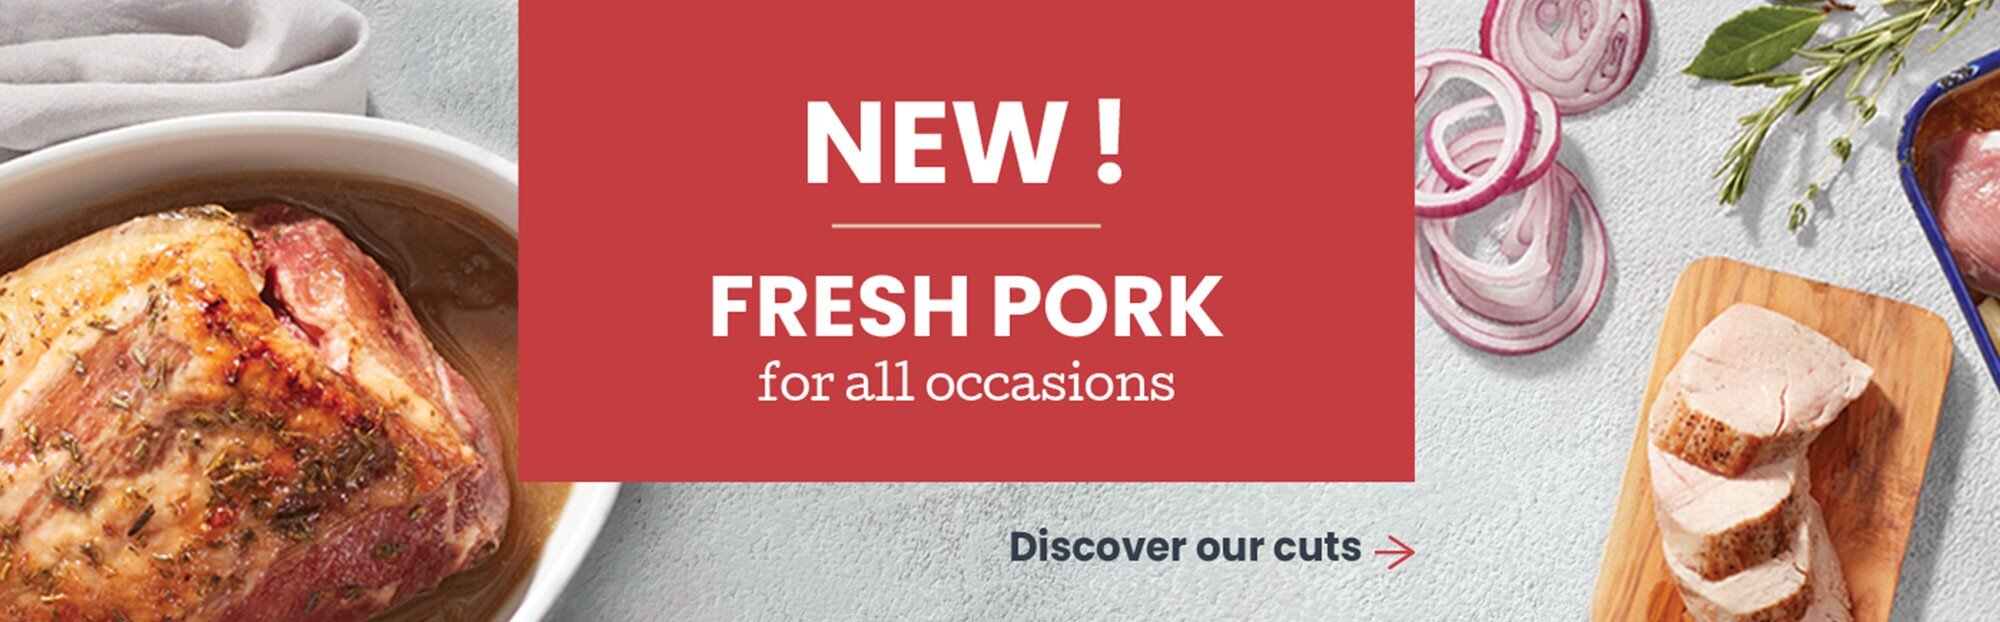 Fresh Pork for all occasions